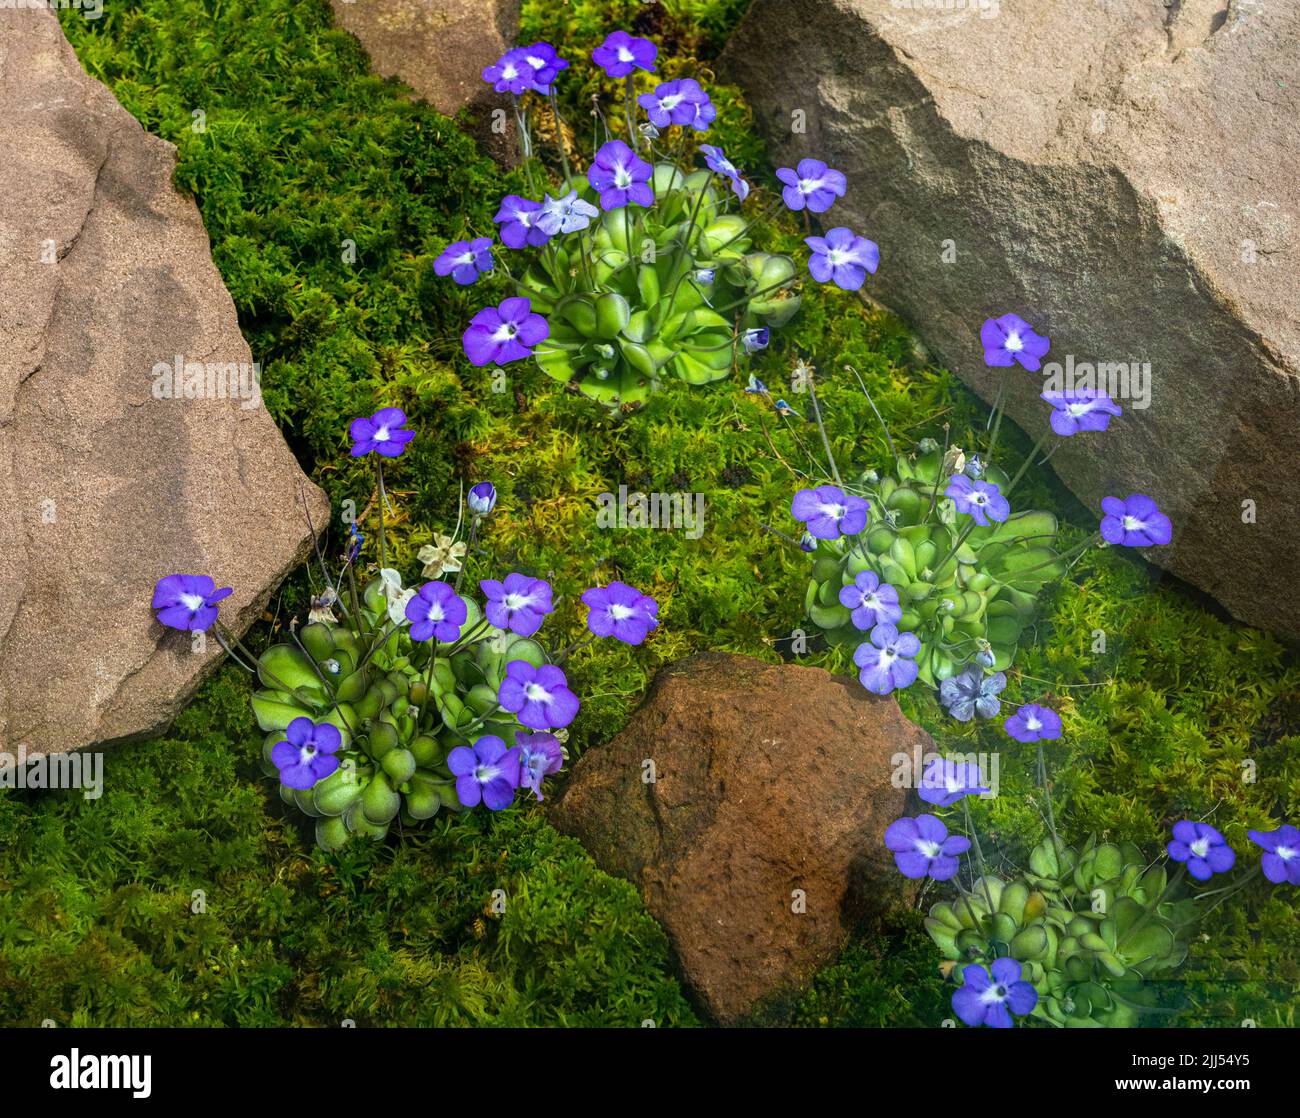 Mexican butterwort (Pinguicula cyclosecta) is a carnivorous or insectivorous plant endemic to Mexico. Stock Photo